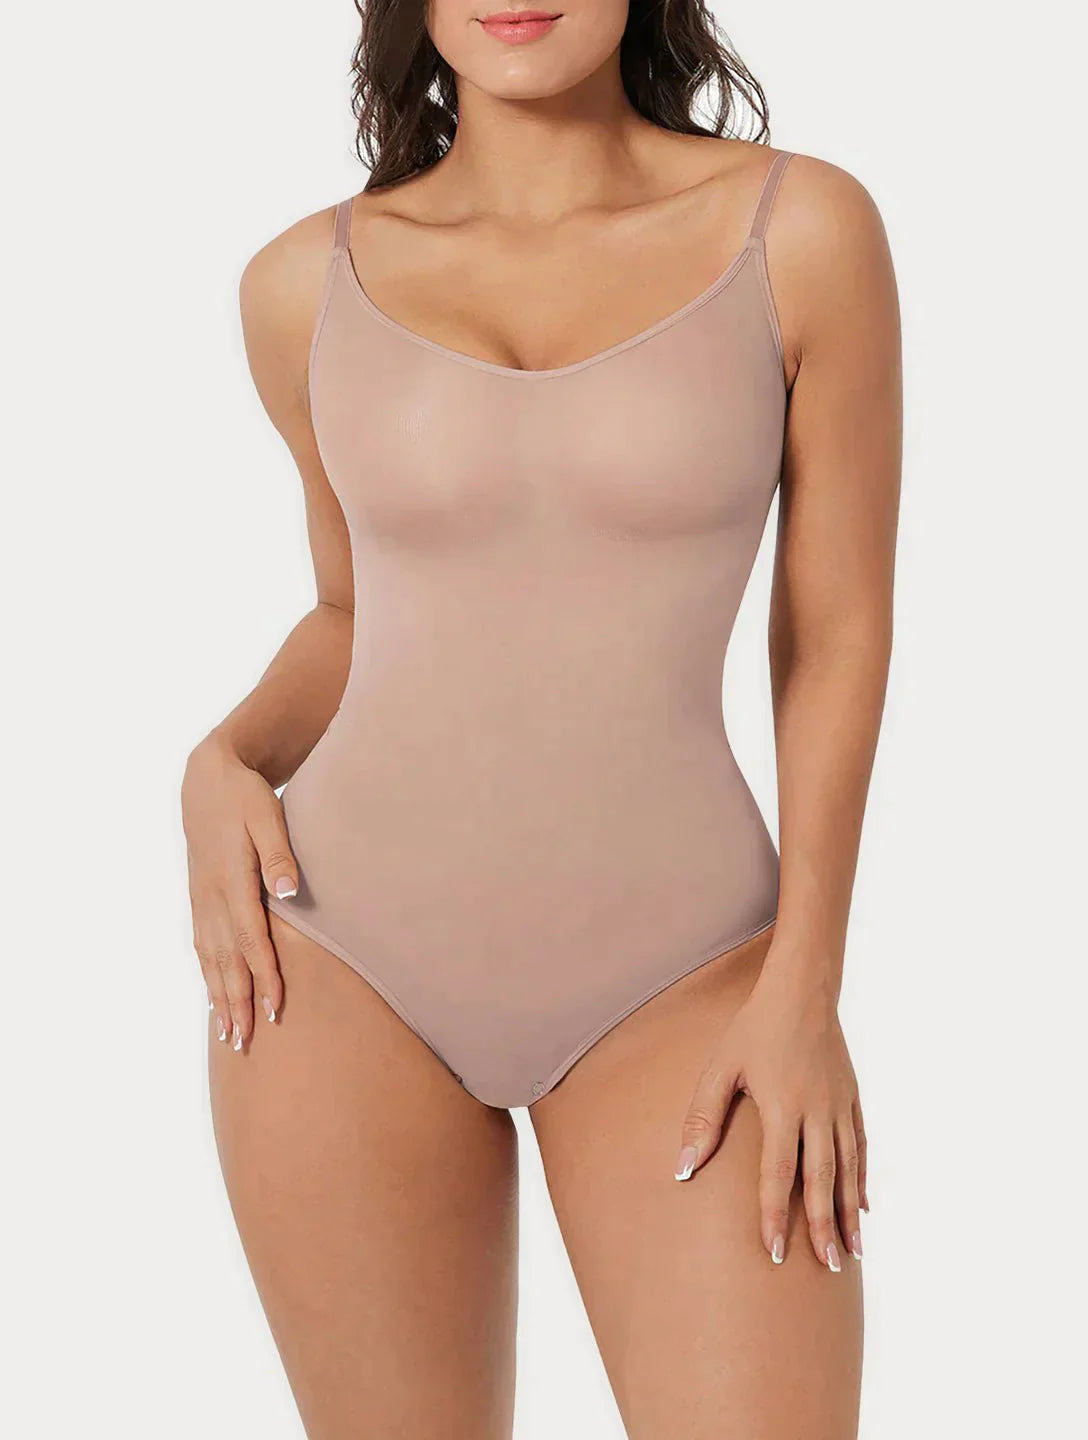 Upgraded Snatched Shapewear Bodysuit, Bodysuit for Women Seamless Tummy  Control Sculpting Thong Body Shaper Tank Top (Beige,2XL)